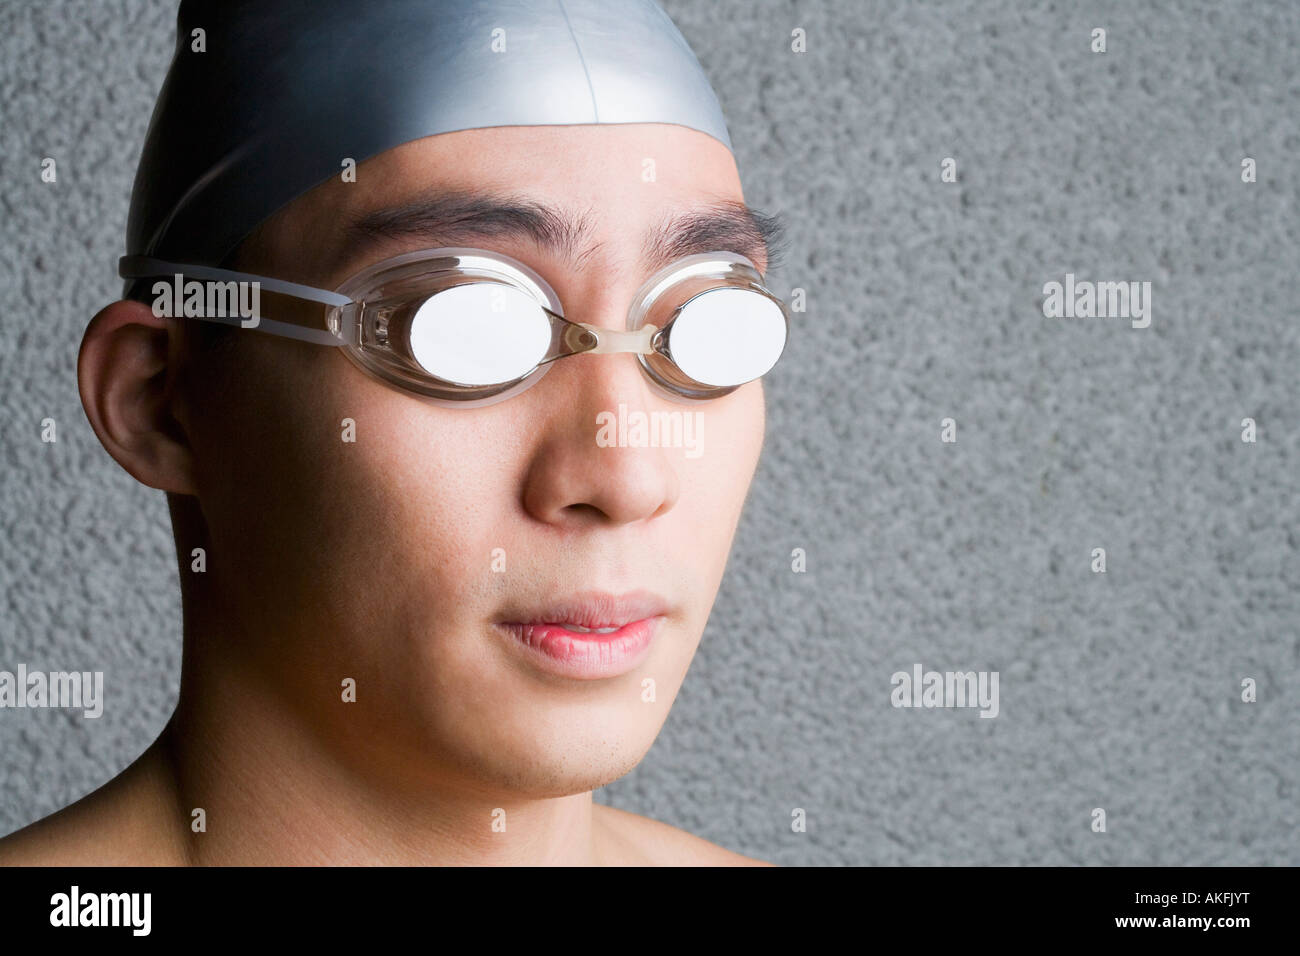 Close-up of a young man wearing swimming goggles Stock Photo